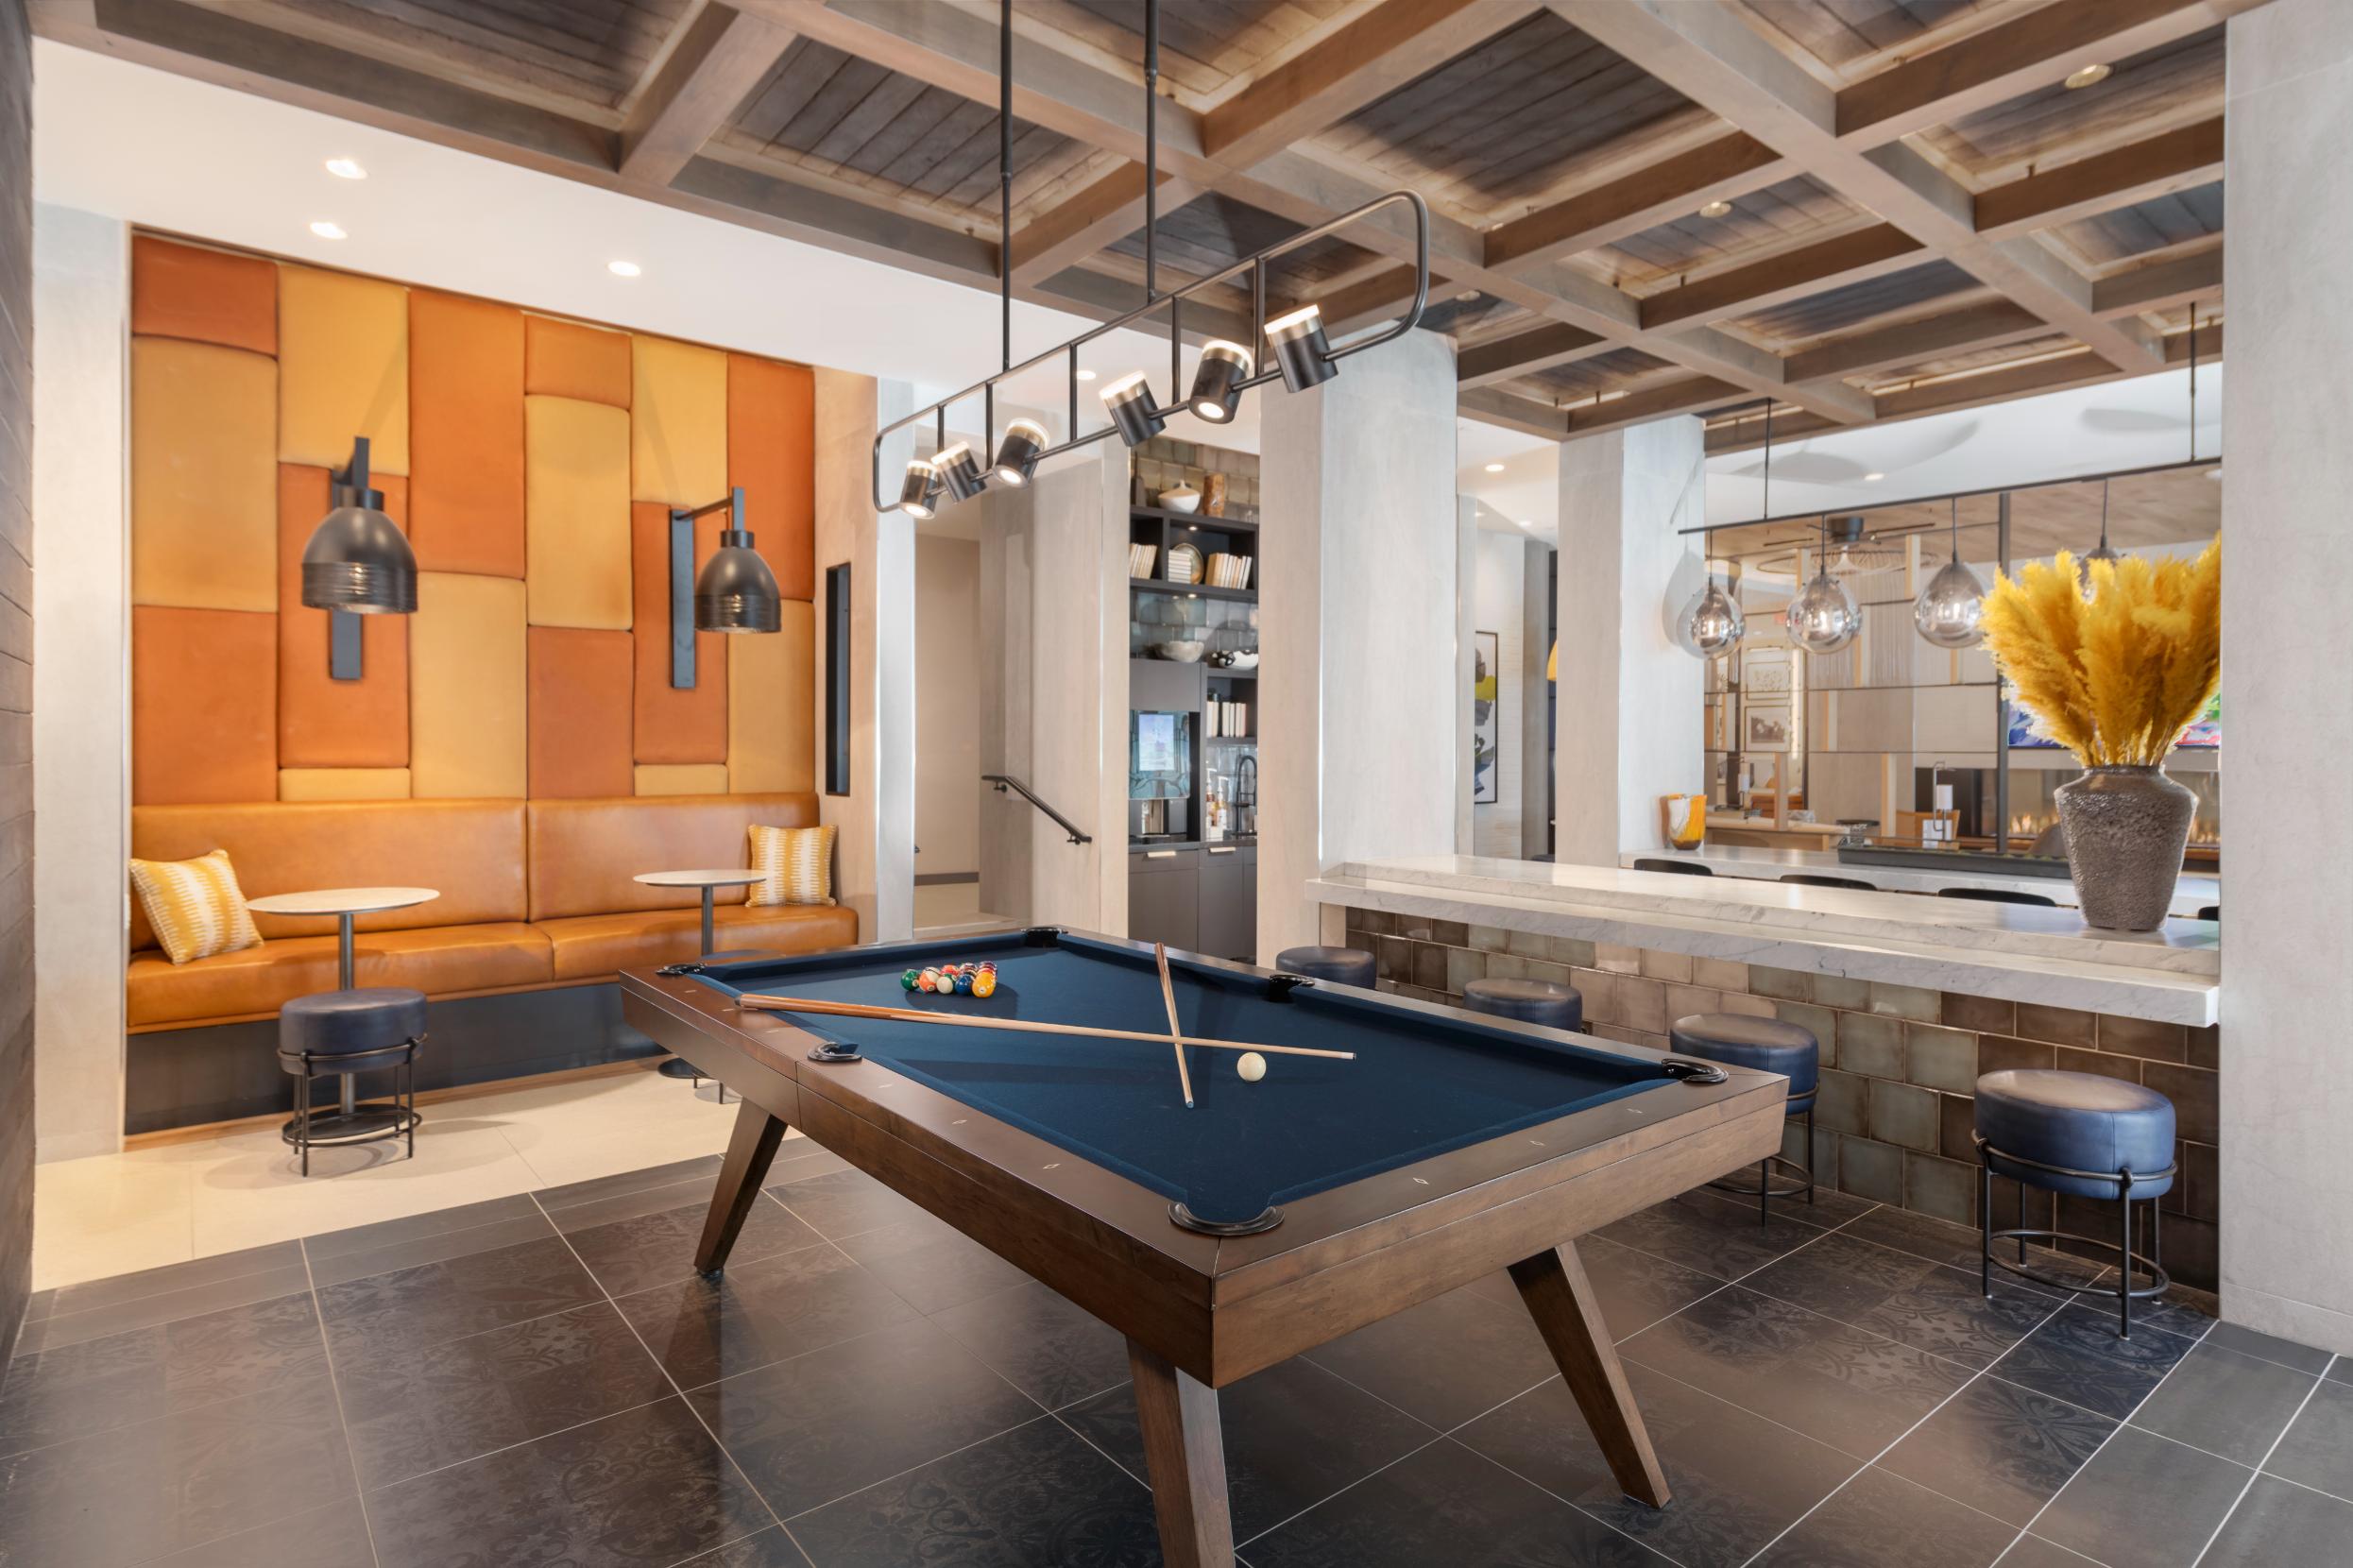 Social lounge featuring an exhibition kitchen, bar area and billiards room.